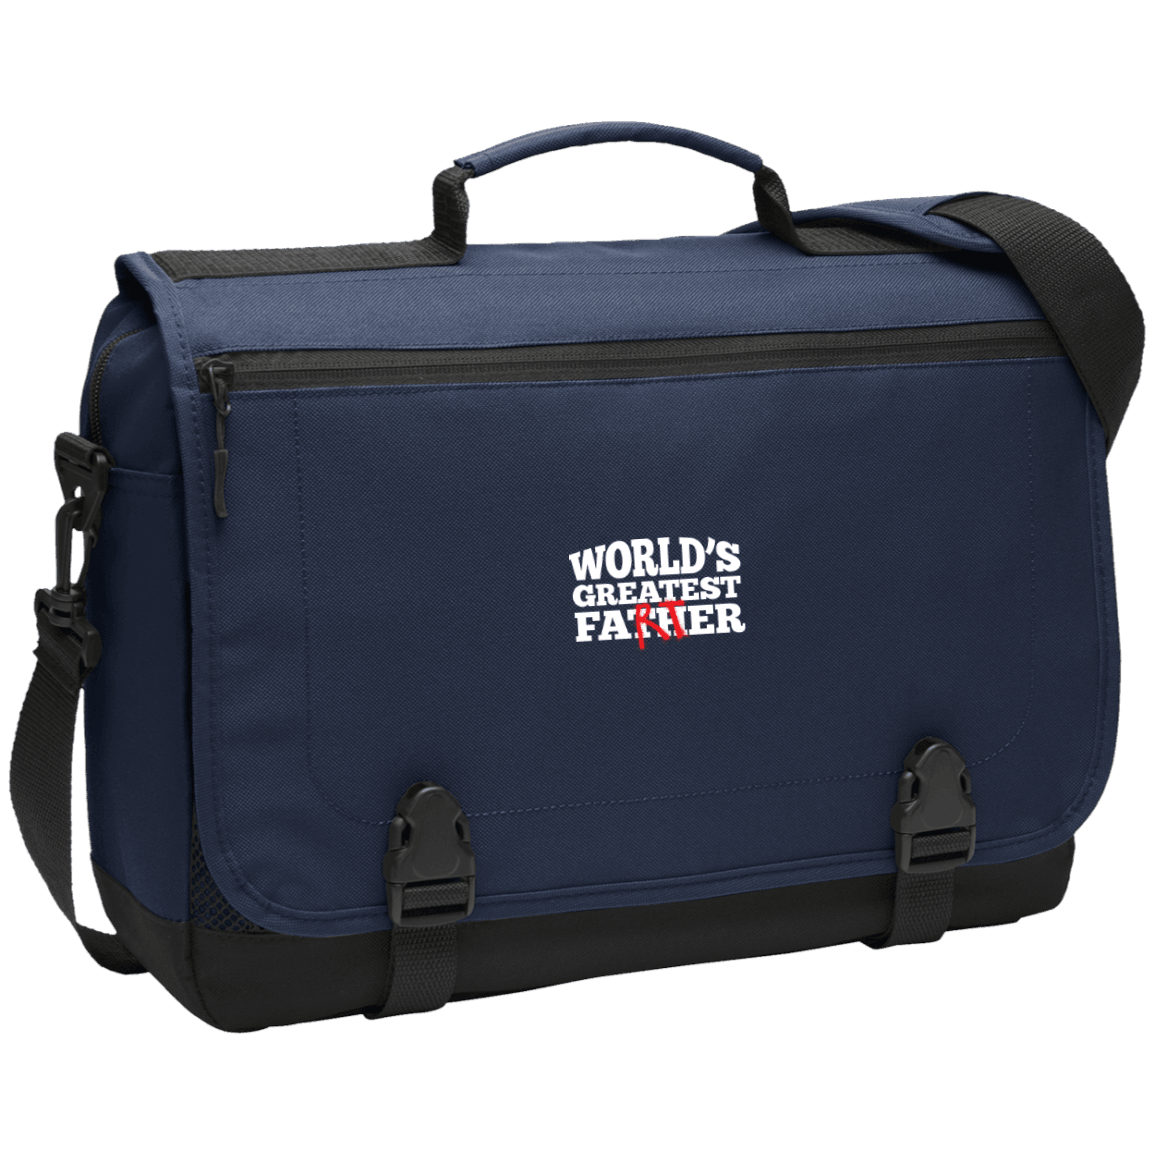 Designs by MyUtopia Shout Out:Worlds Greatest Father (Farter) Embroidered Port Authority Messenger Briefcase - Navy Blue,Navy / One Size,Bags